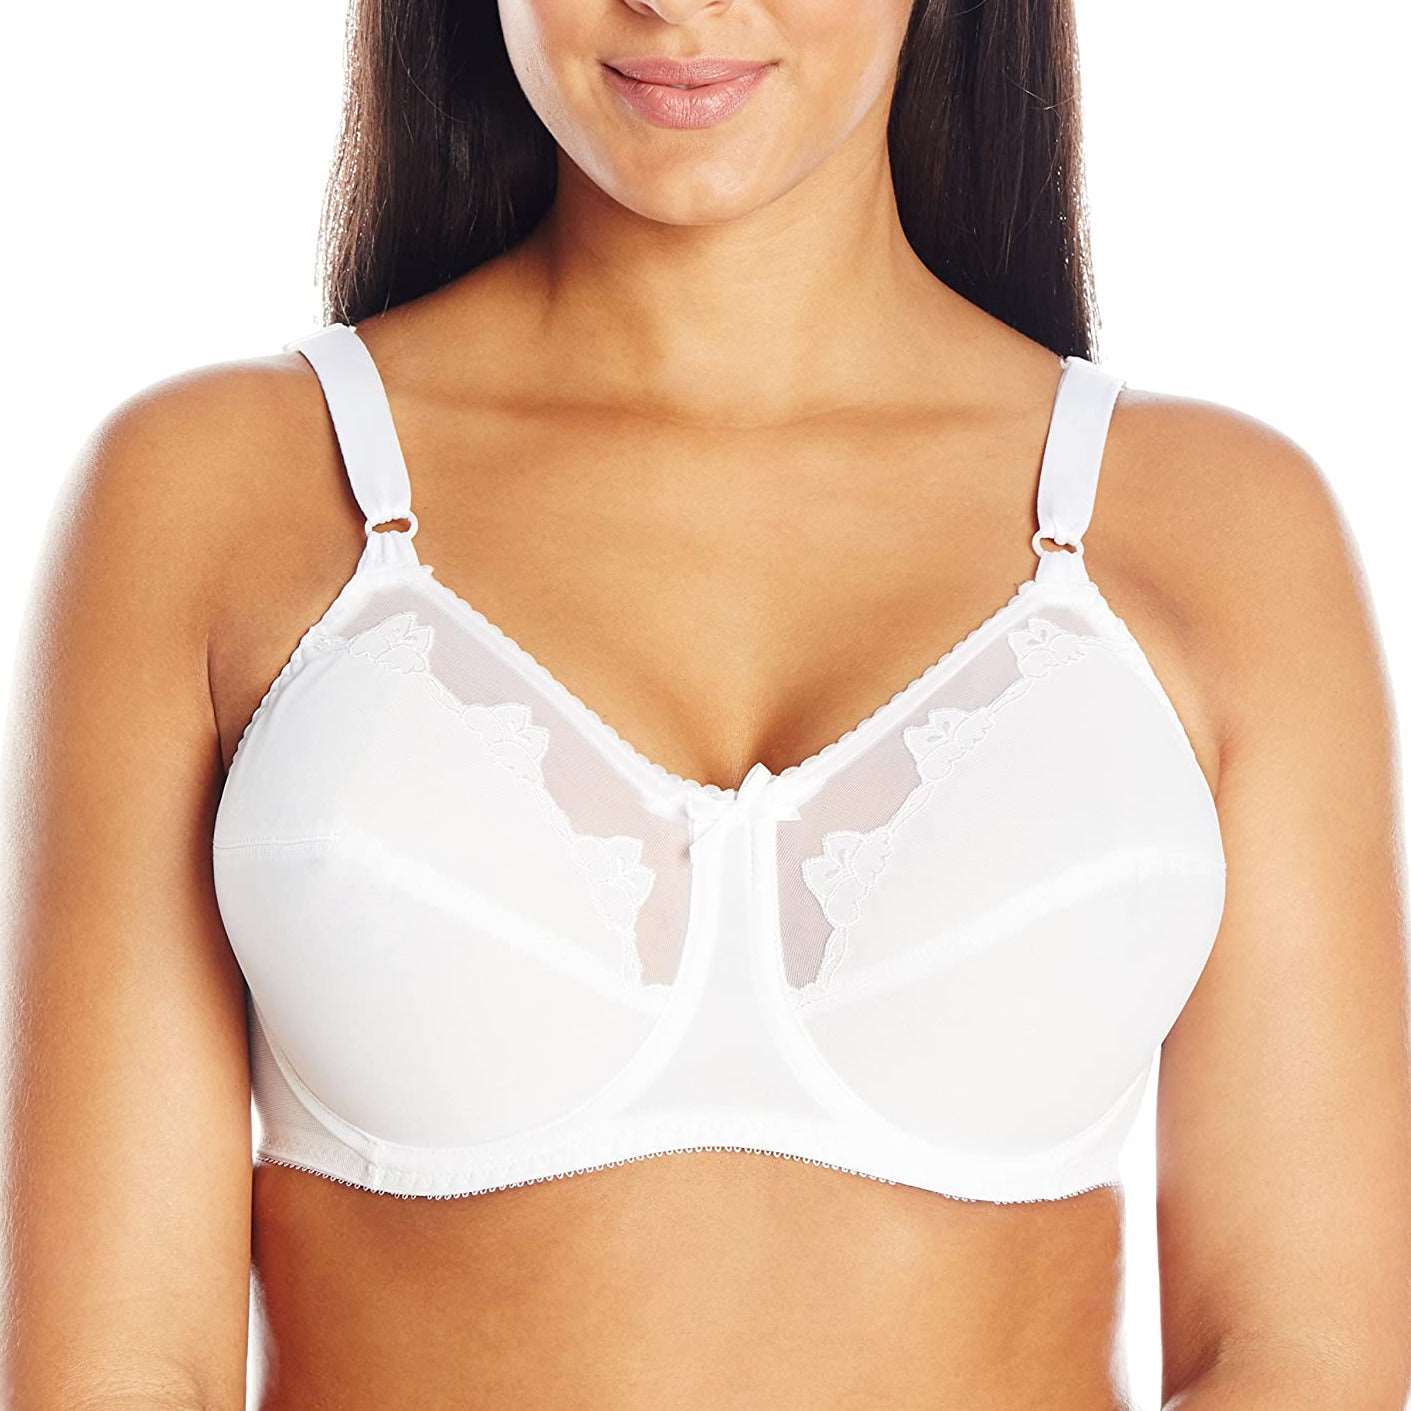 Flower by Bali Underwire White Bra Band 48 Multiple Cup Sizes